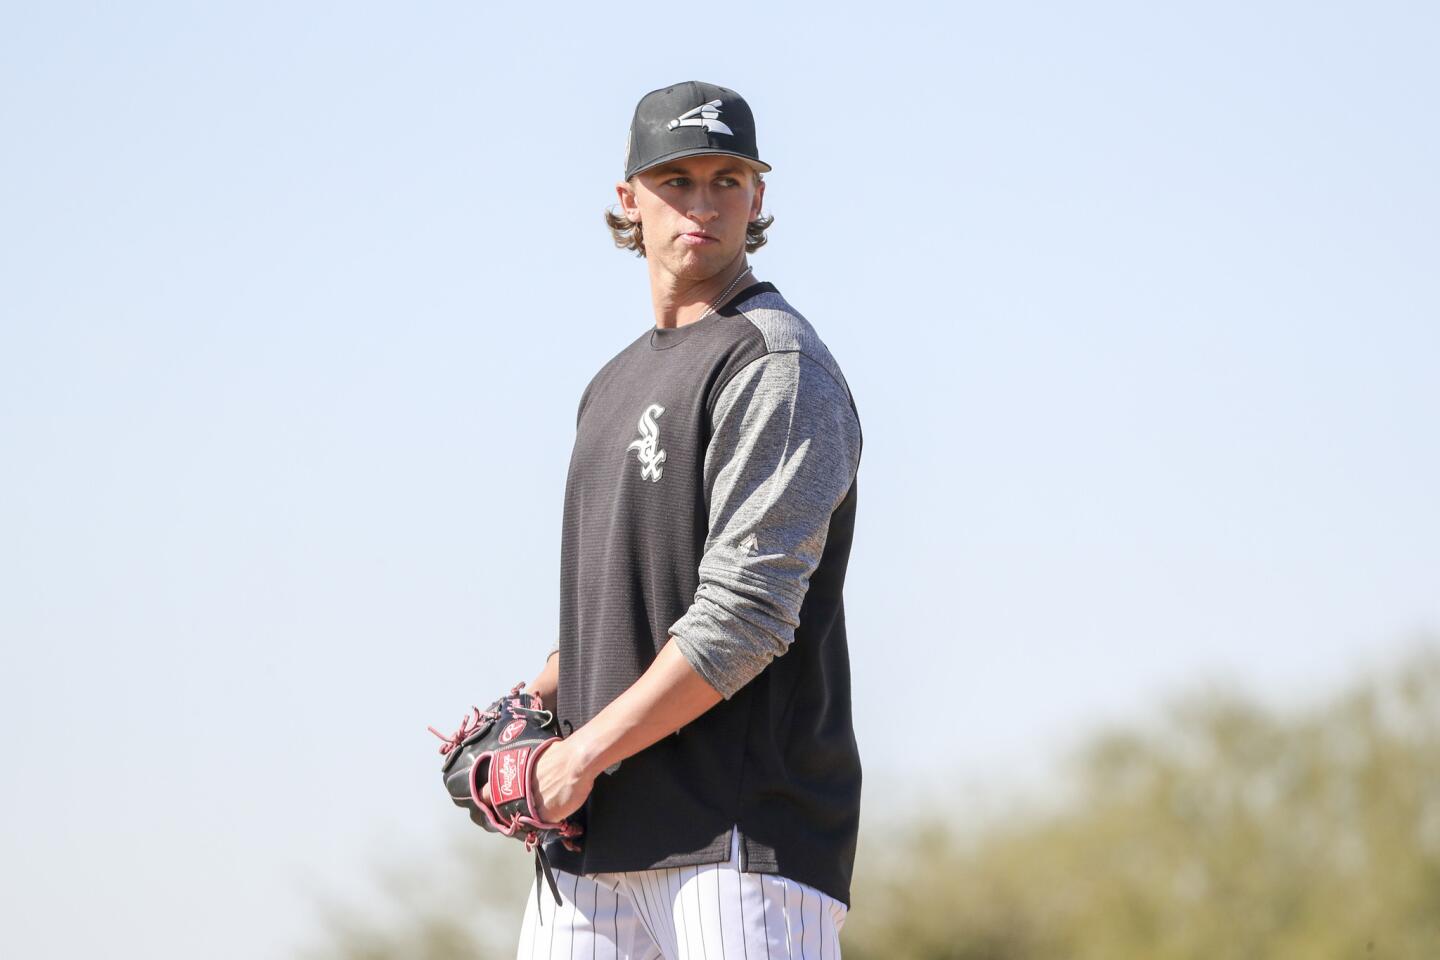 Michael Kopech stands on the mound at White Sox spring training at Camelback Ranch on Feb. 21, 2018, in Glendale, Ariz.